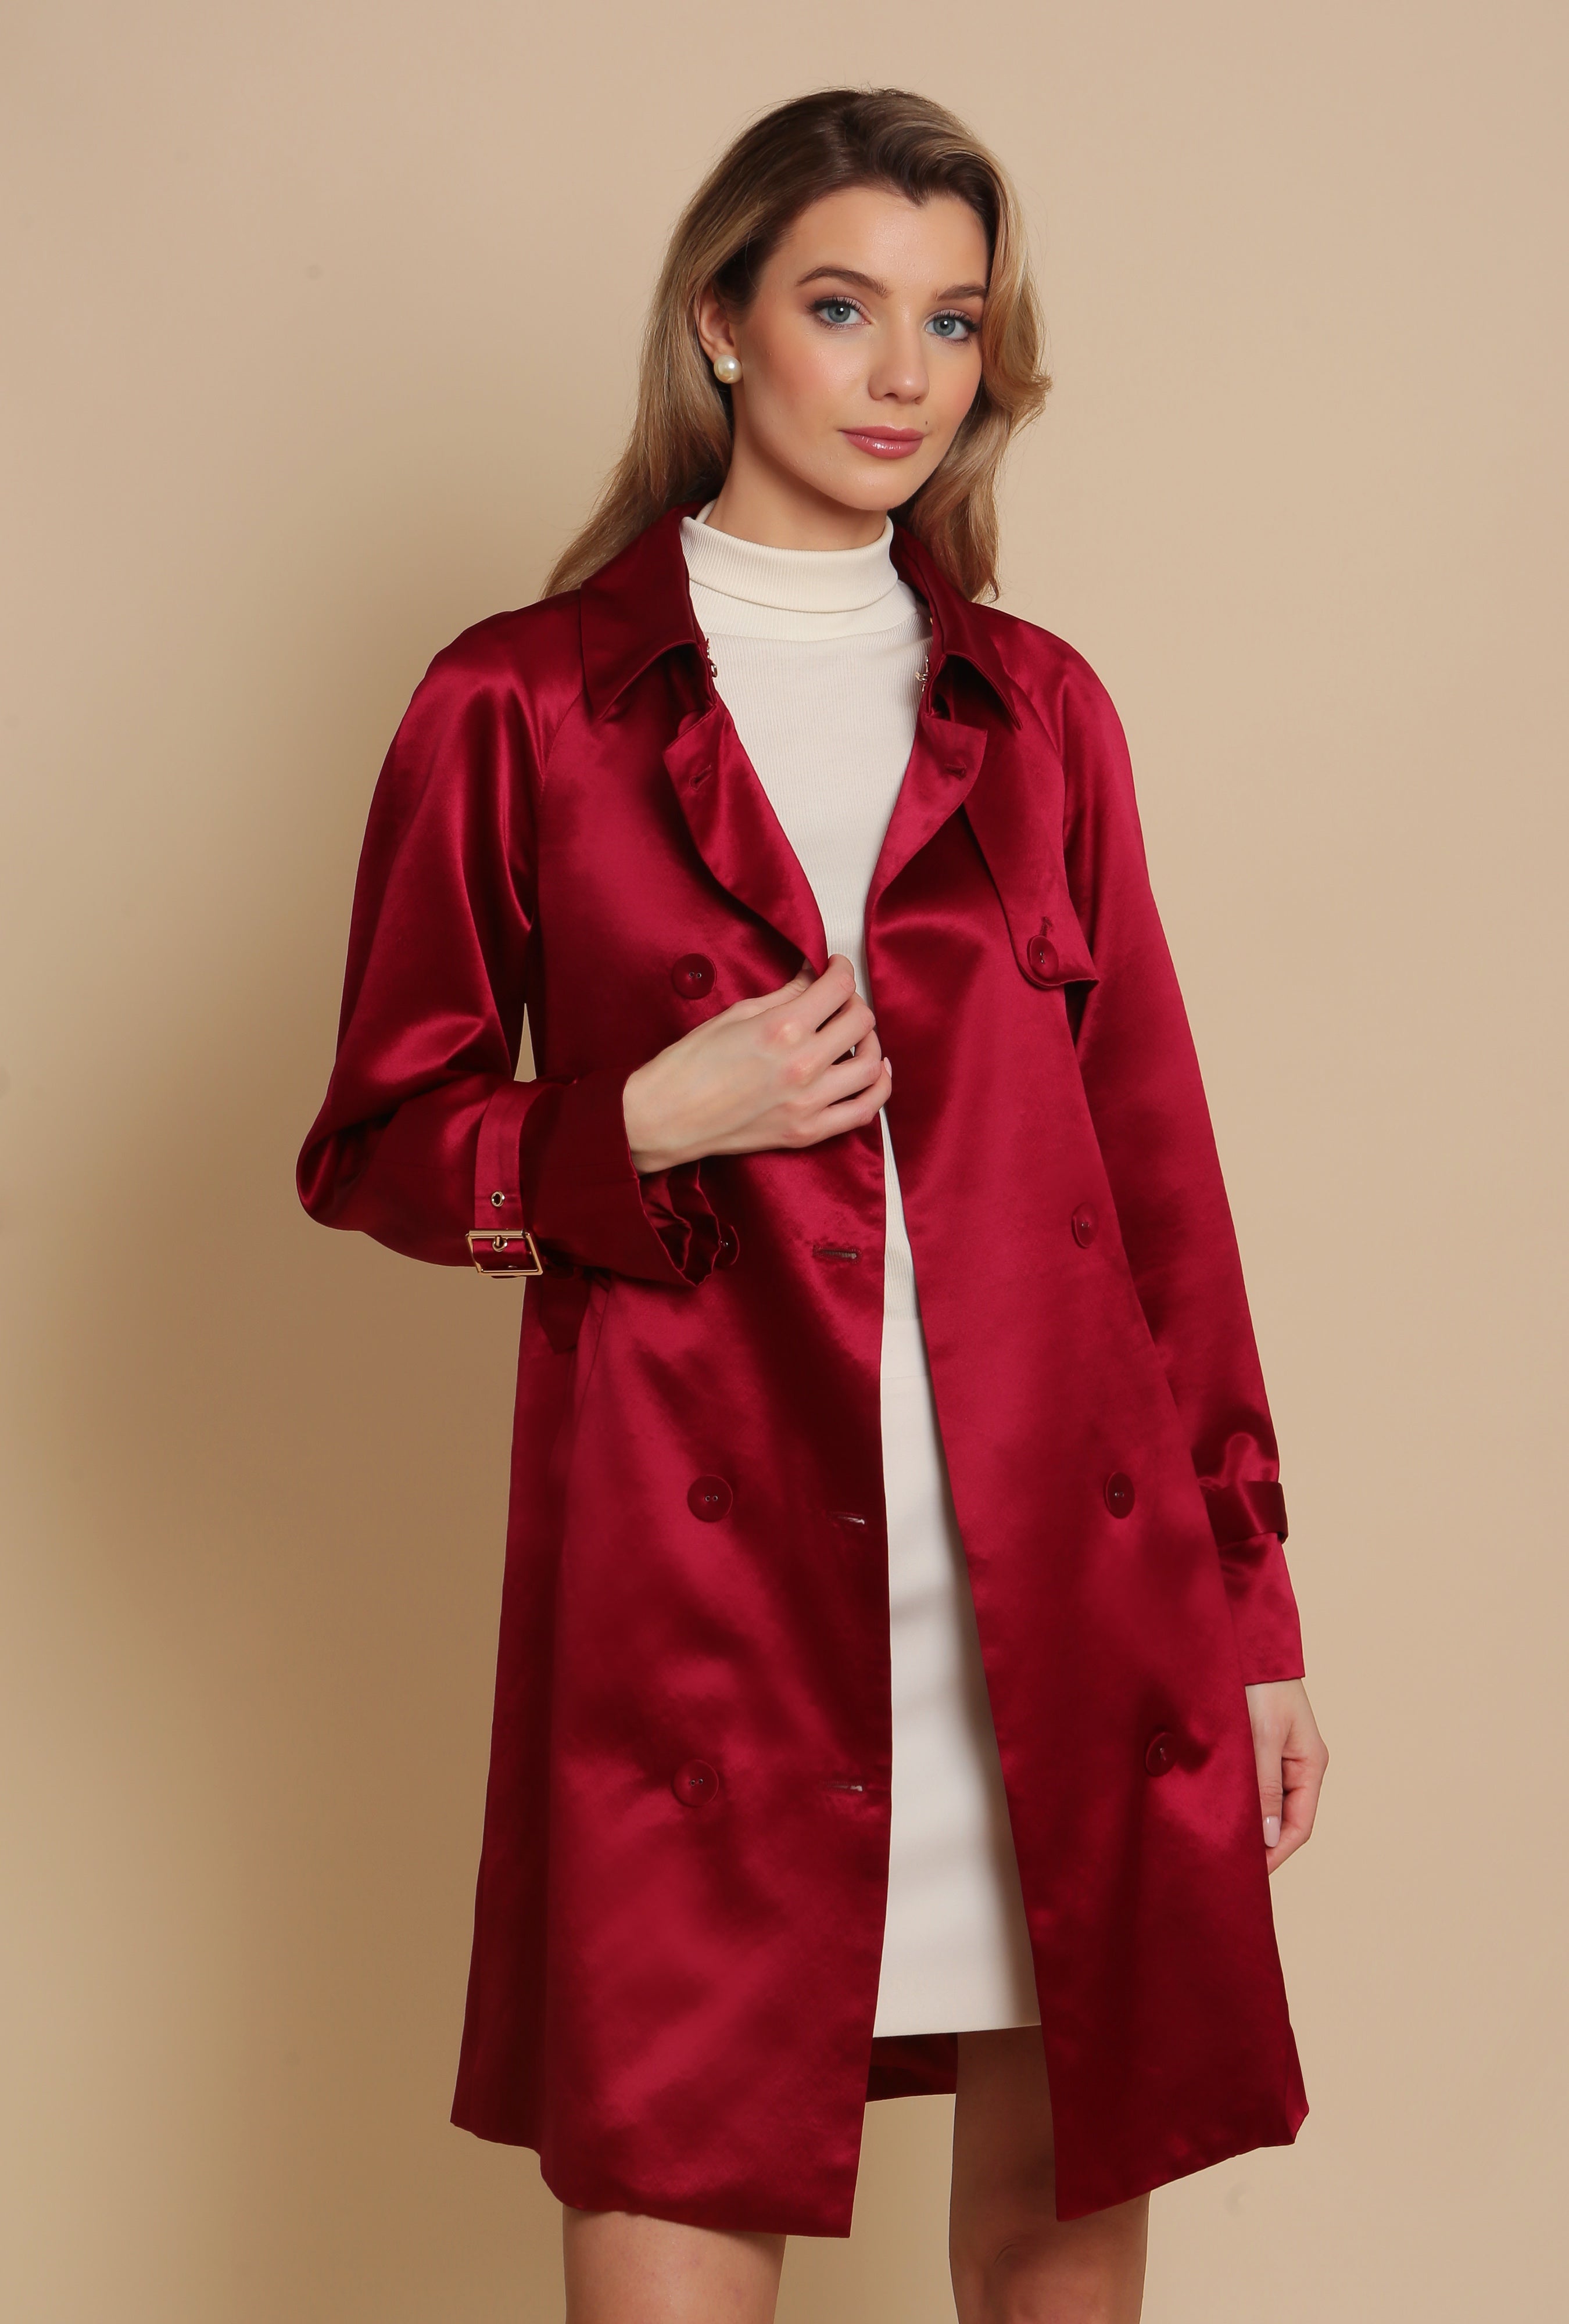 'La Dolce Vita' Wool and Silk Trench Coat in Rosso